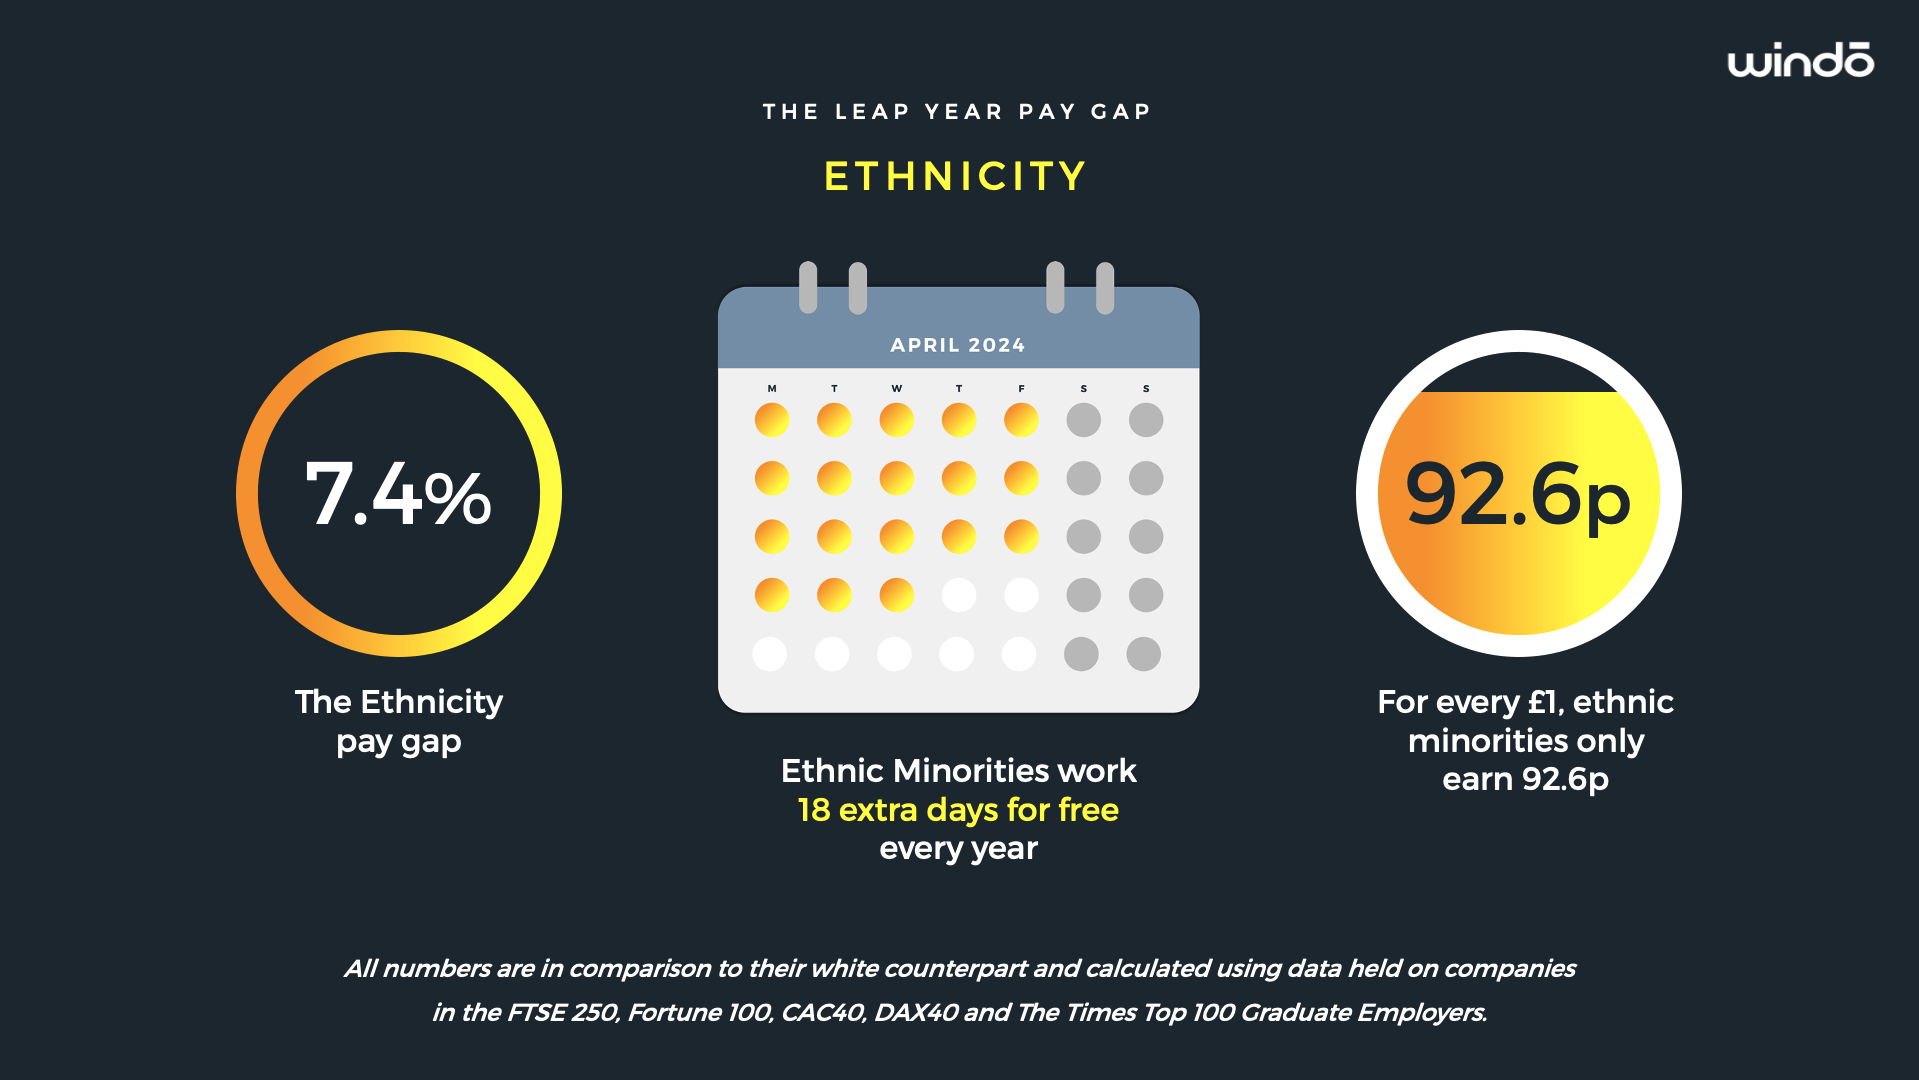 Windo_The_Leap_Year_Ethnicity_Pay_Gap_2024